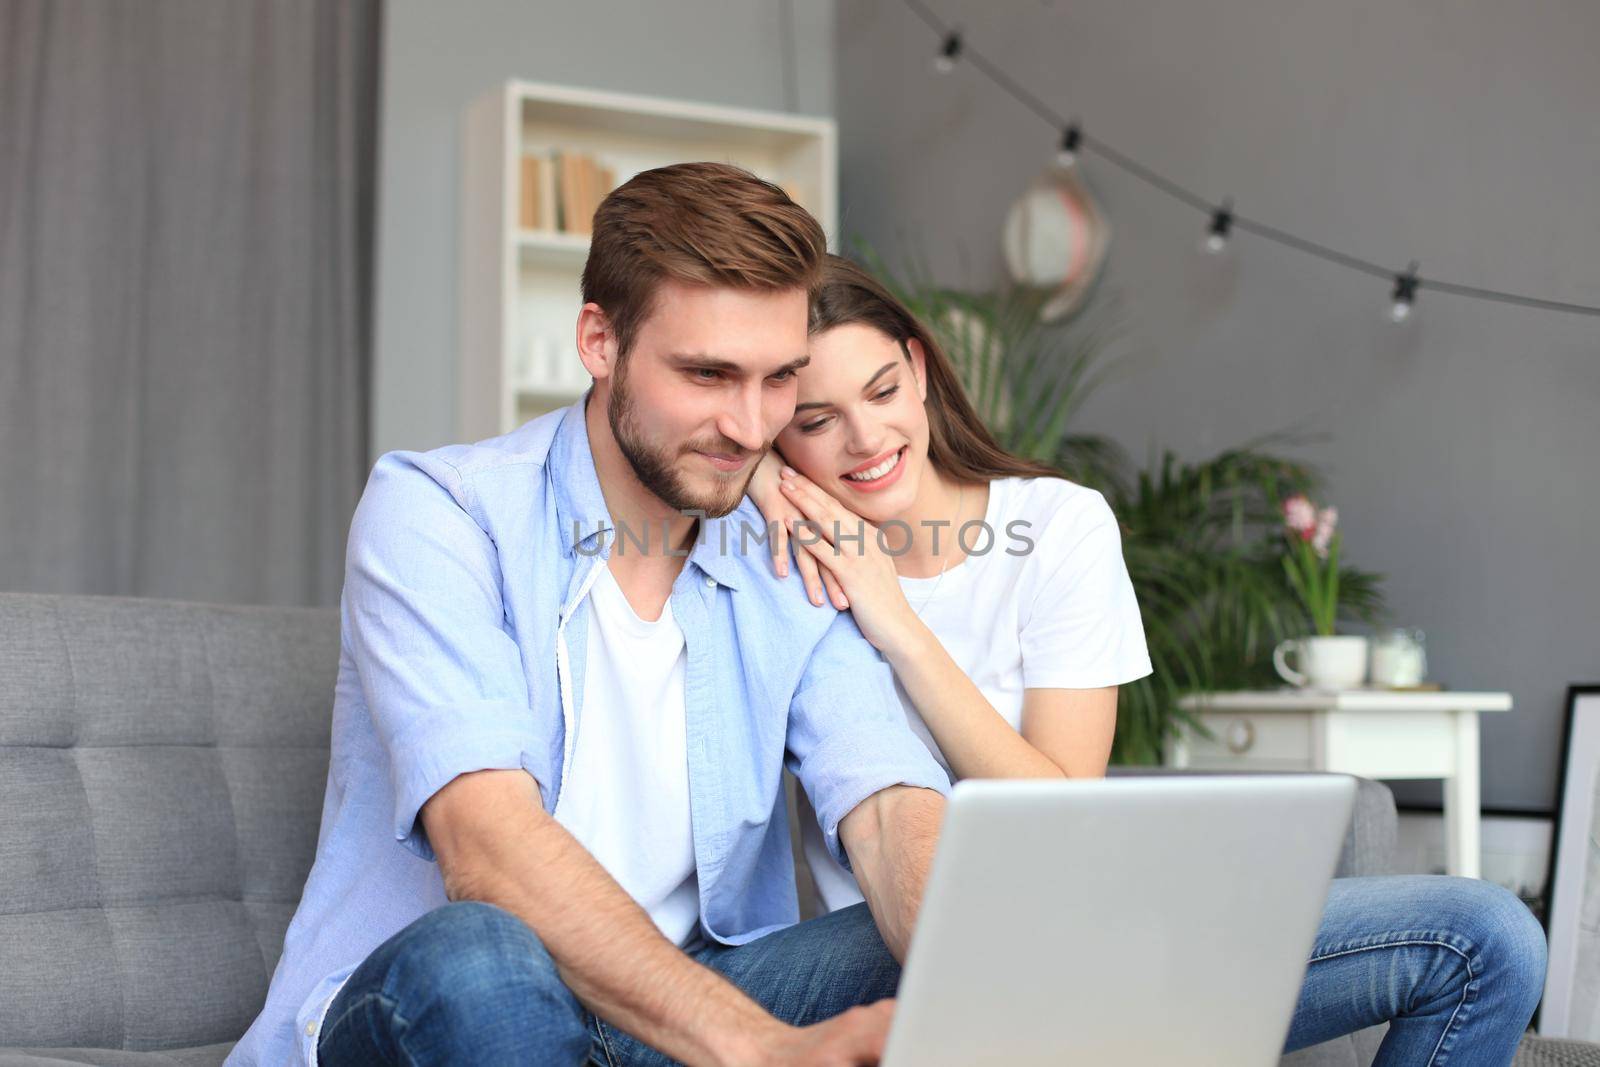 Young couple doing some online shopping at home, using a laptop on the sofa